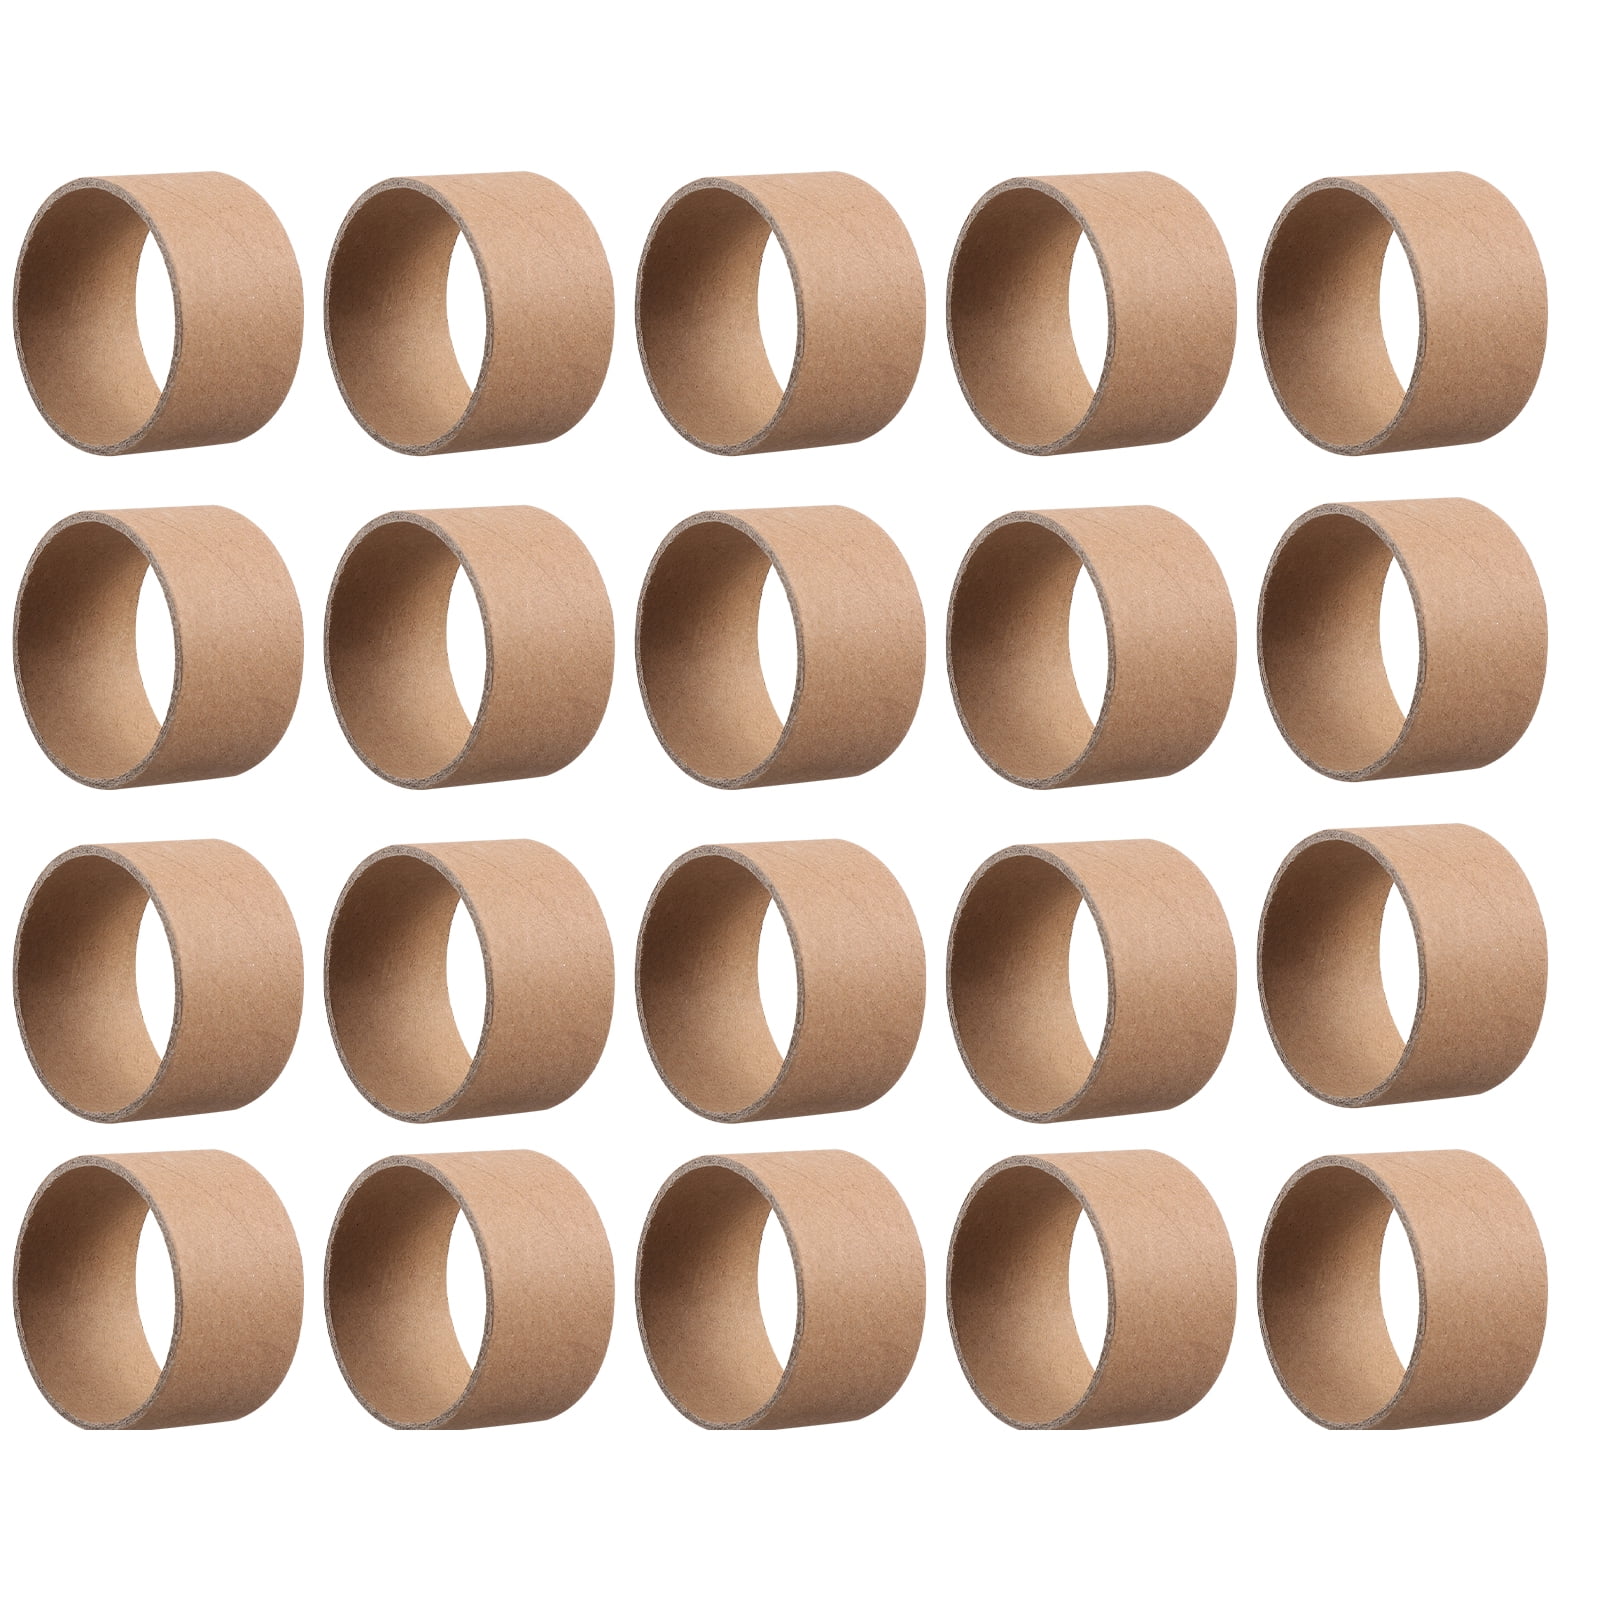 30 Pack 8 Inch Cardboard Tubes, 1.6x8“ Empty Toilet Paper Rolls For Crafts  and Art Projects, DIY Brown Crafting Paper Roll for Classrooms, Dioramas,  and Decorations 